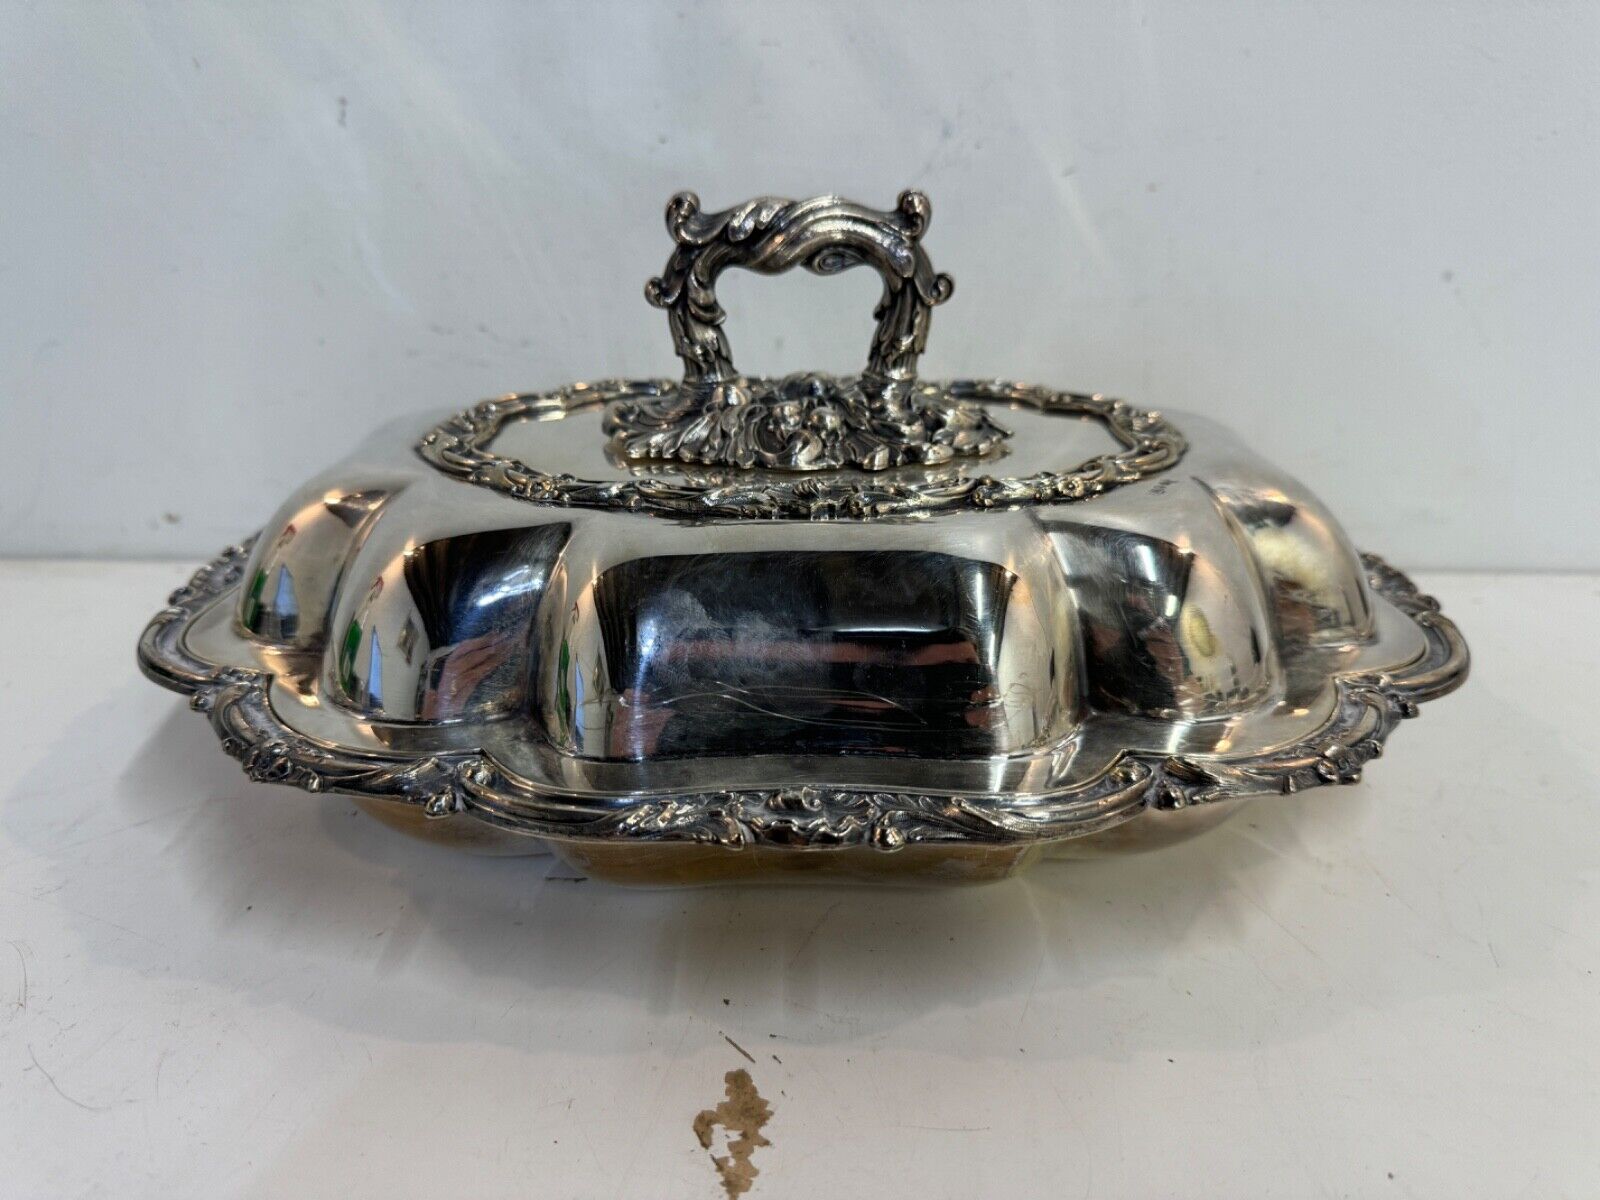 Vintage Thomas Weir English Silverplate Large Covered Entree Dish